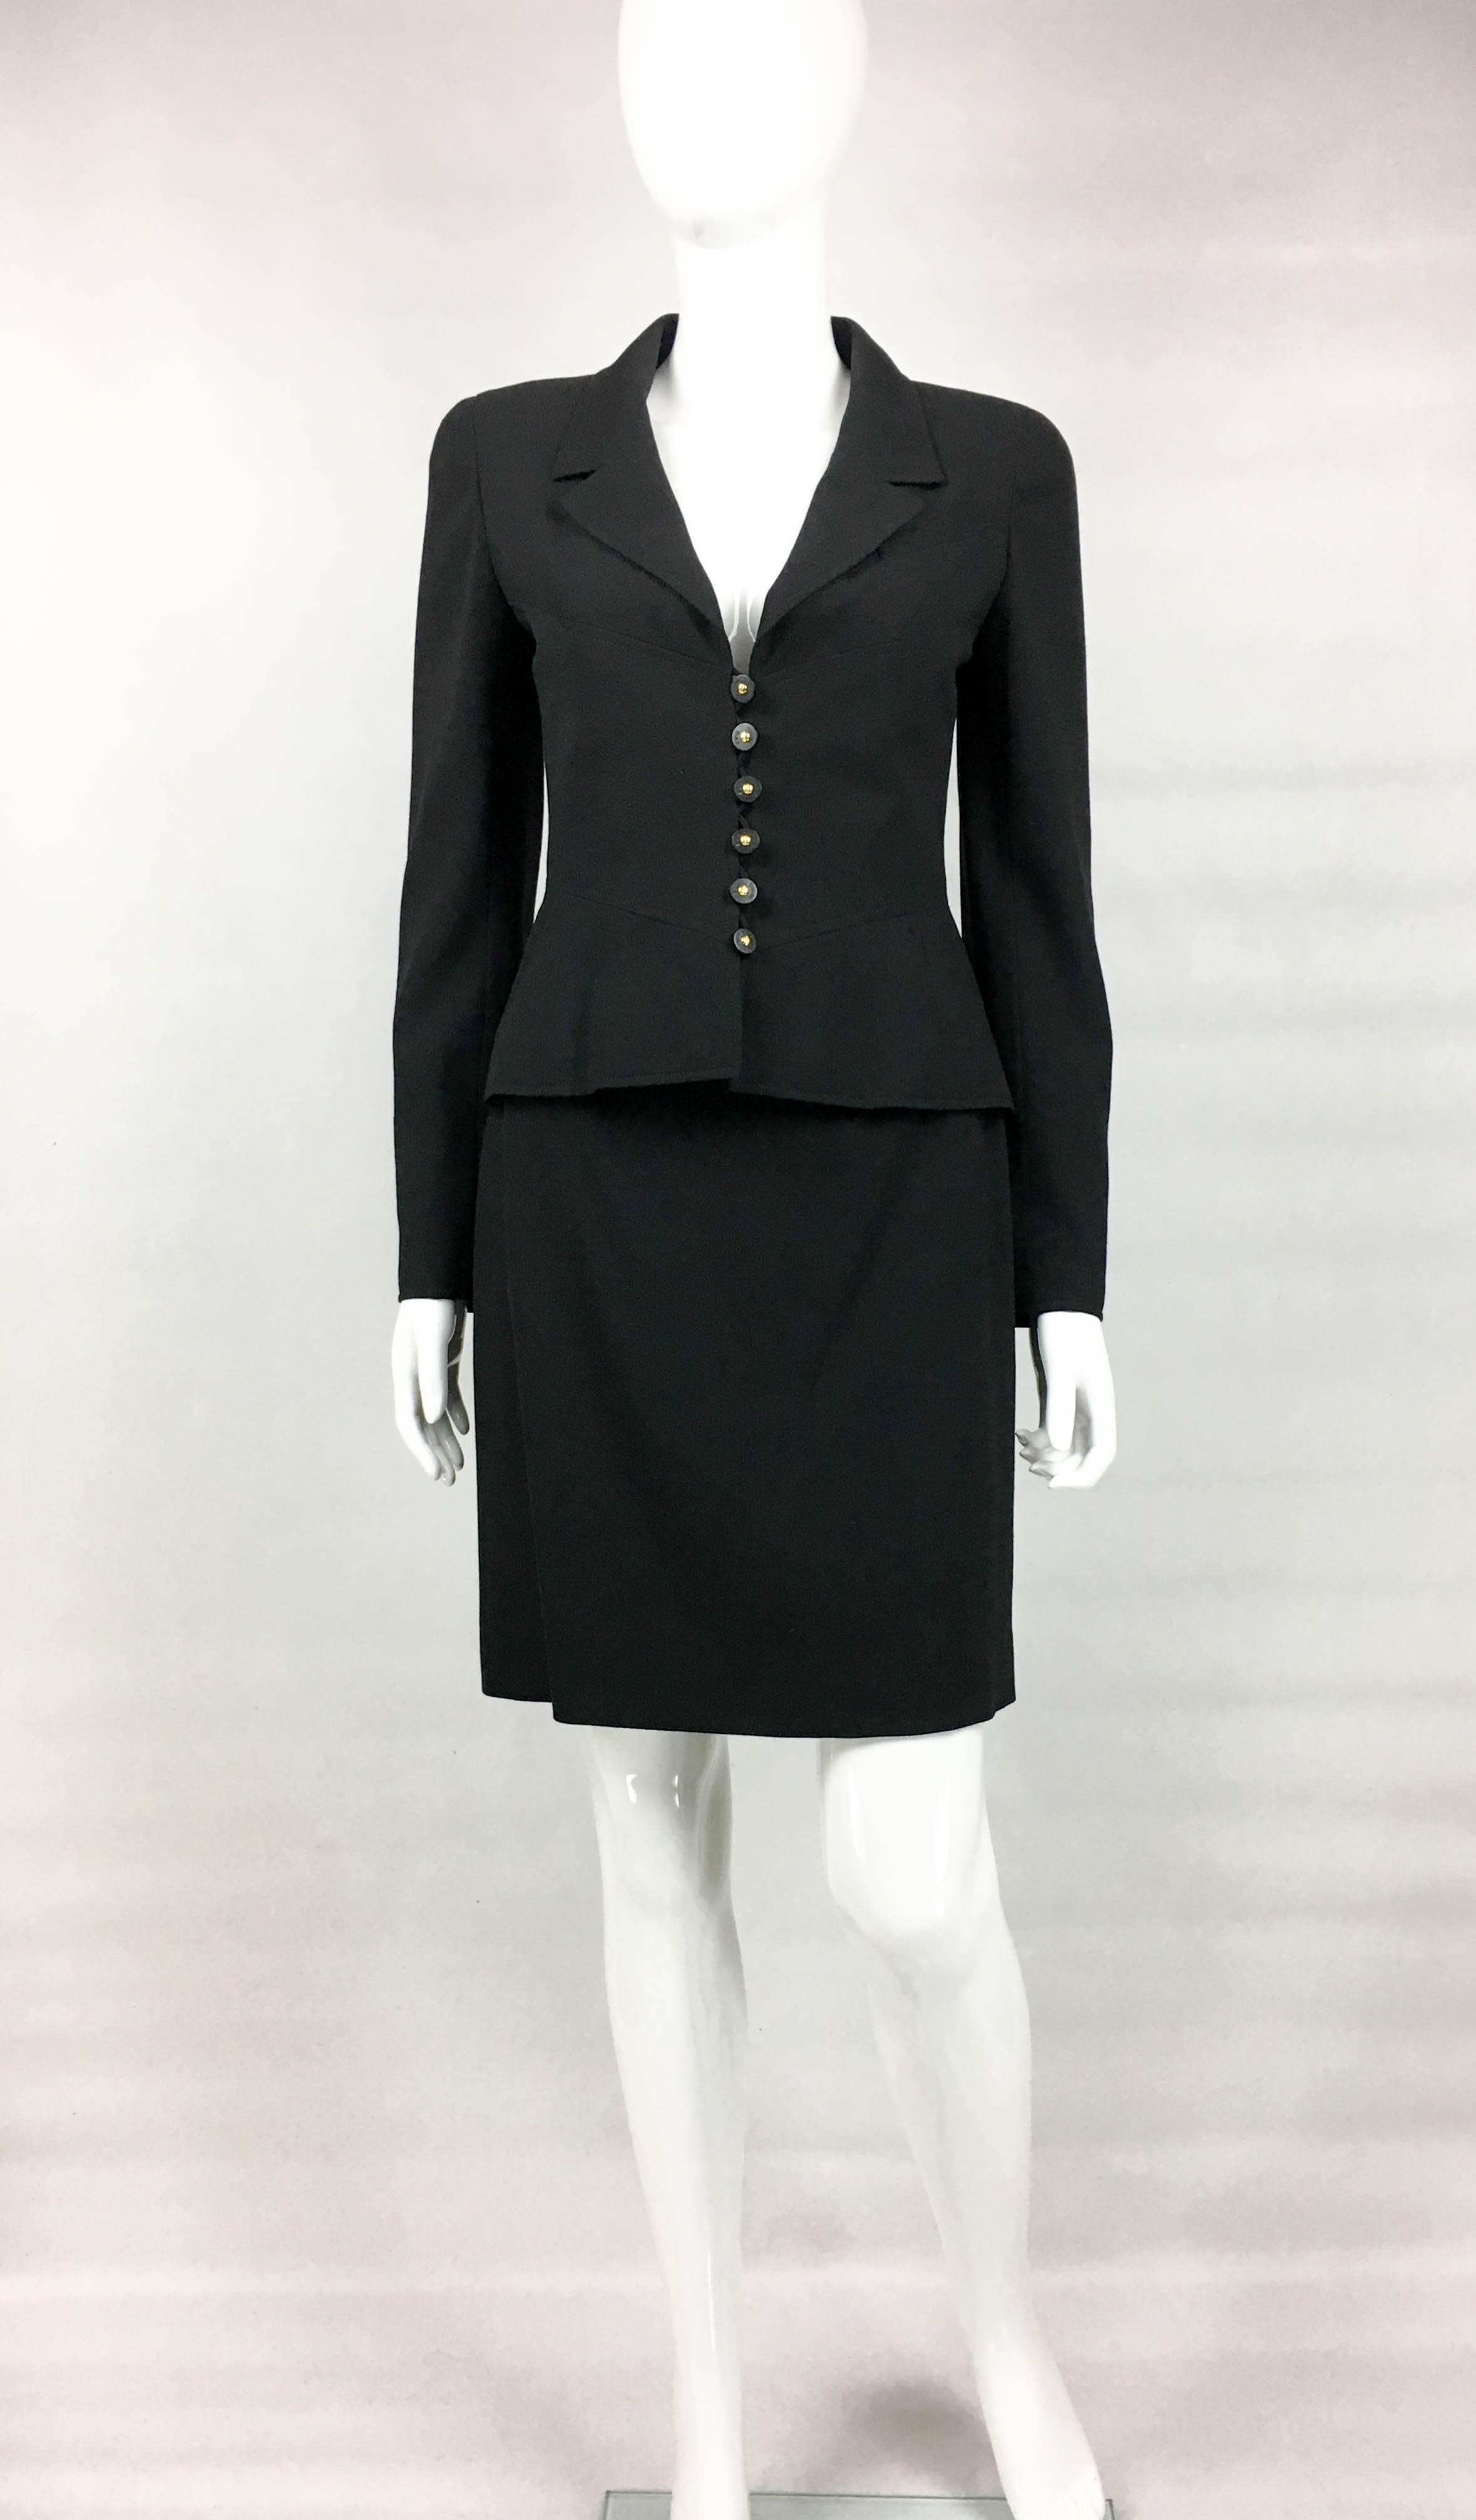 Vintage Chanel Black Wool Skirt Suit. This stylish ensemble by Chanel was part of the 1997 Spring / Summer Collection. Made in black wool and lined in silk, the single-breasted jacket accentuates the waist slightly, and the just above the knee